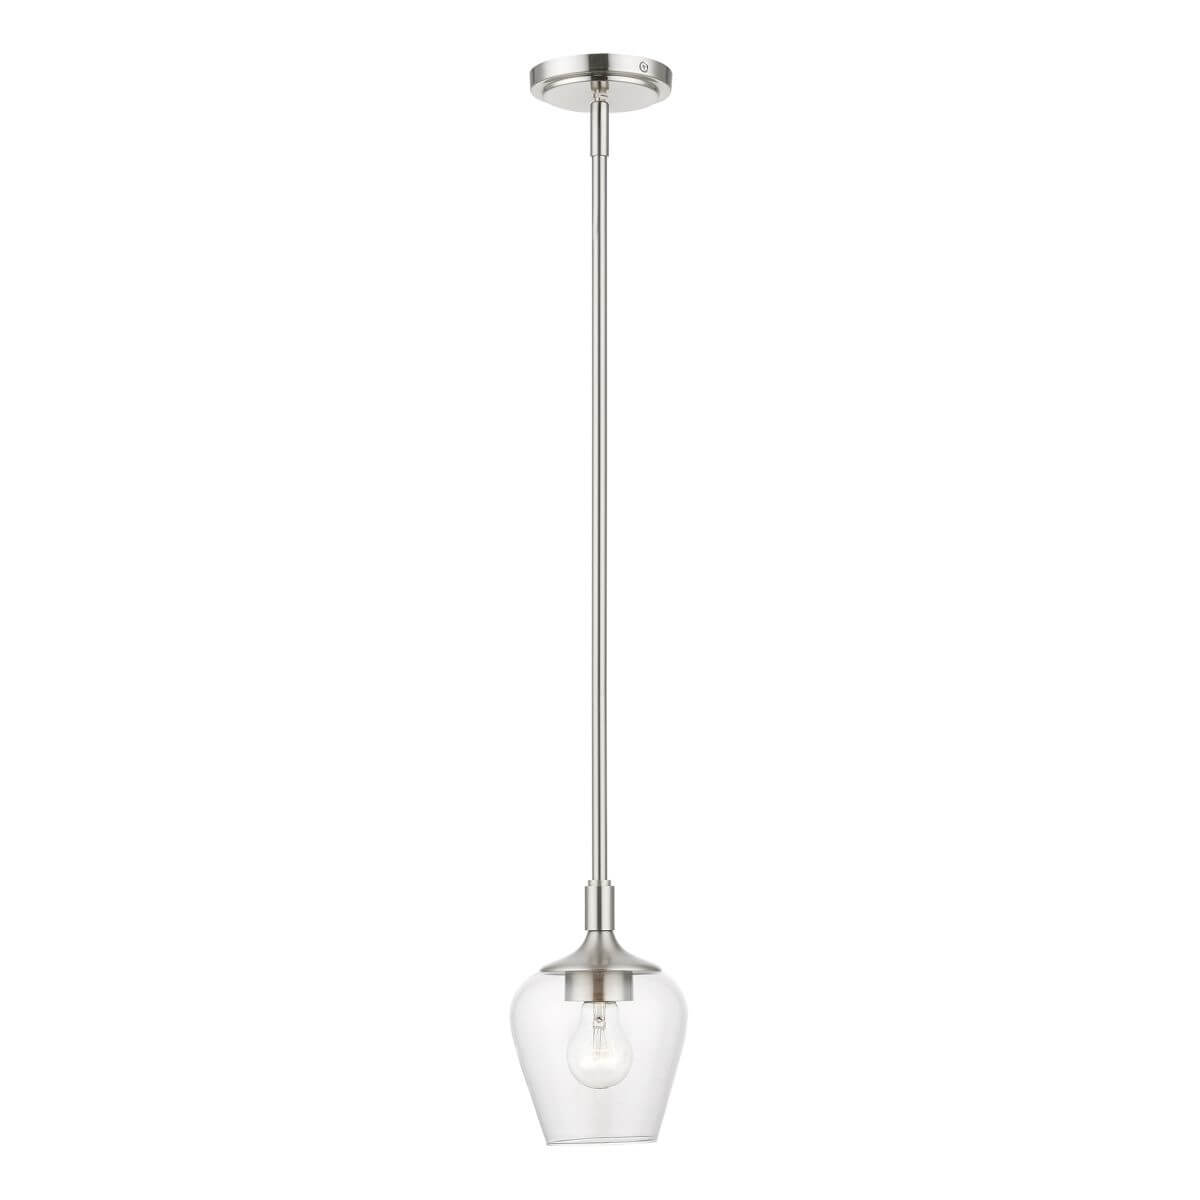 Livex 46721-91 Willow 1 Light 6 inch Pendant in Brushed Nickel with Clear Glass